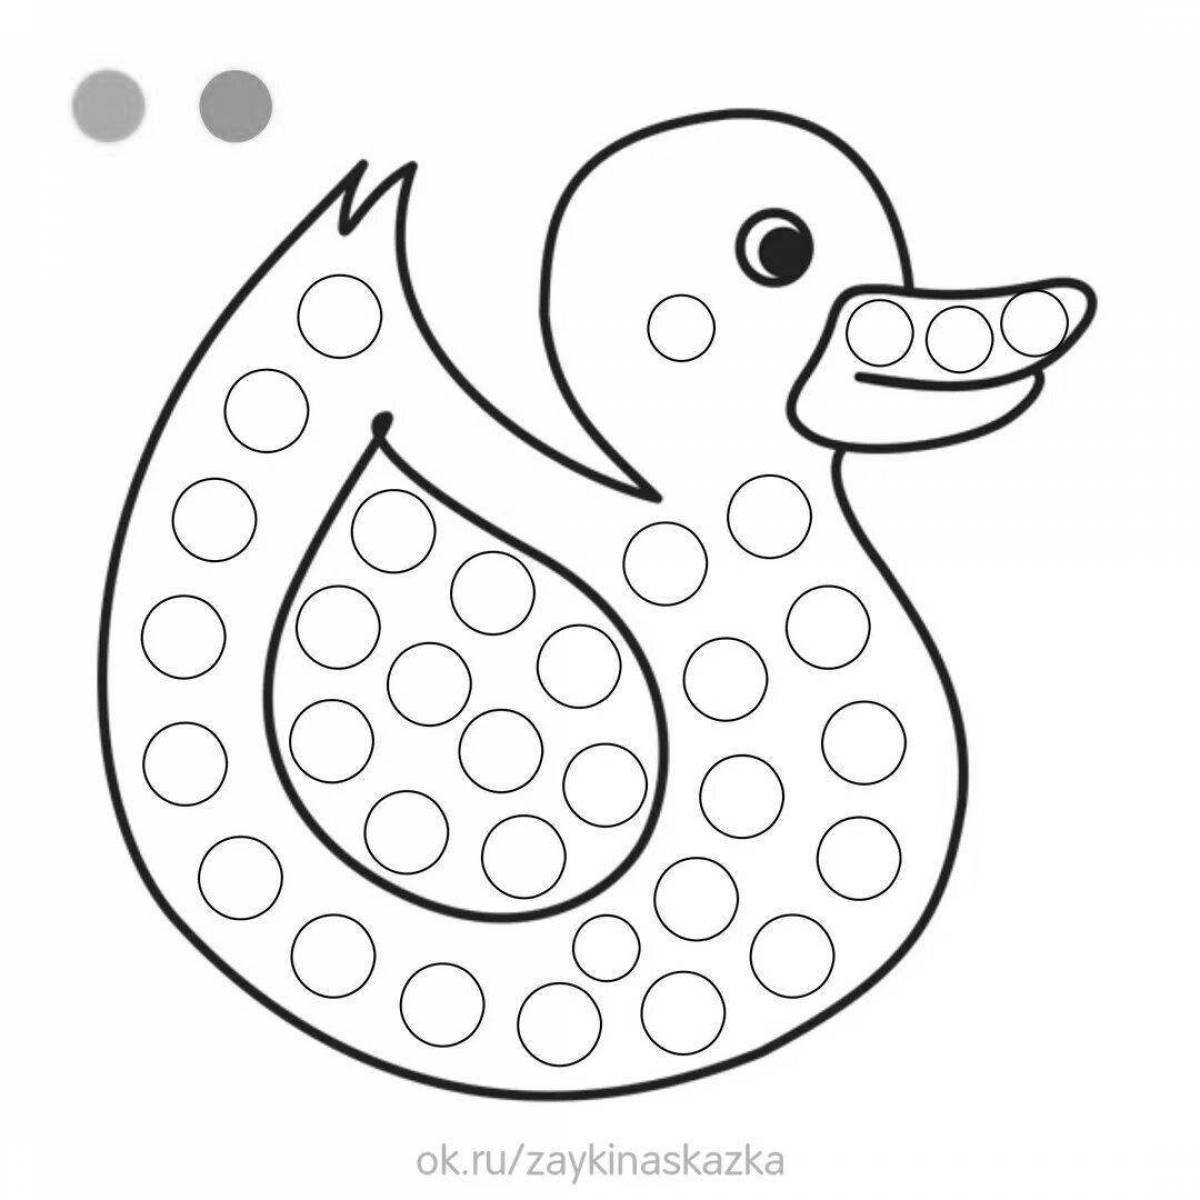 Glowing Dymkovo toy duck coloring page